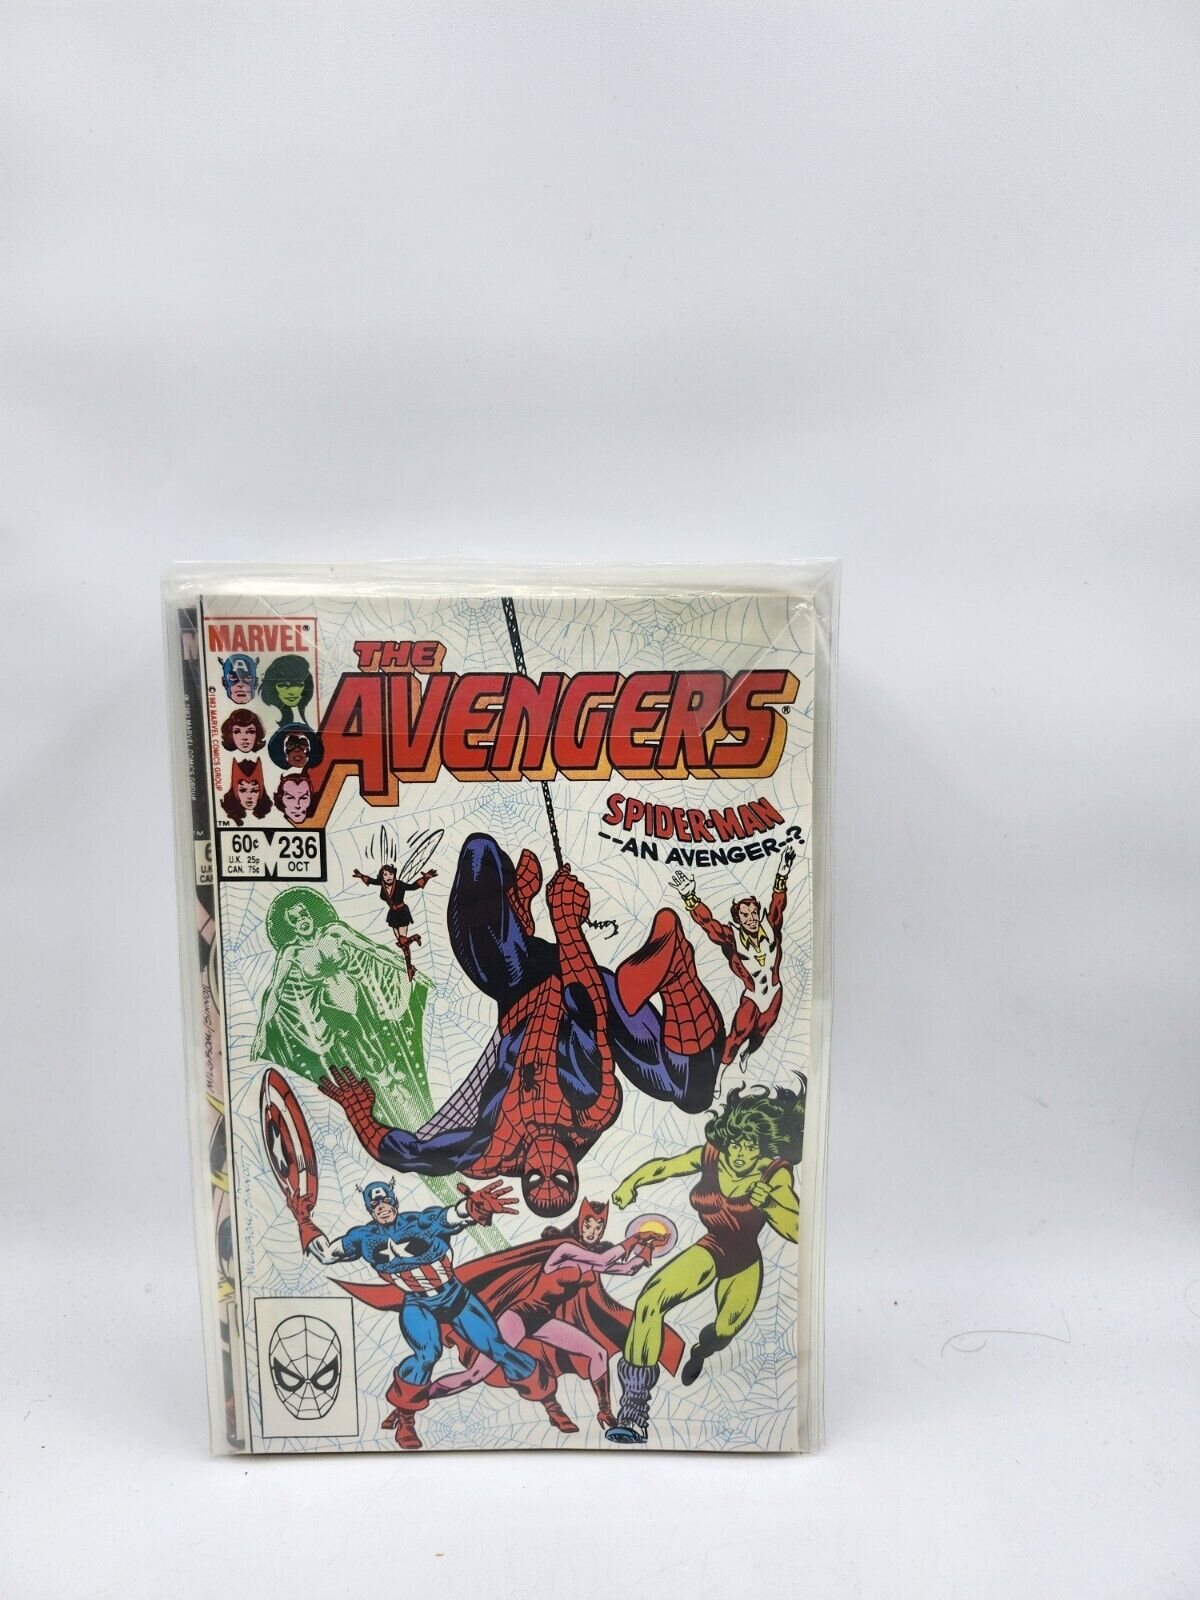 THE AVENGERS #236 1983 Spider-Man Captain America Scarlet Witch She-Hulk